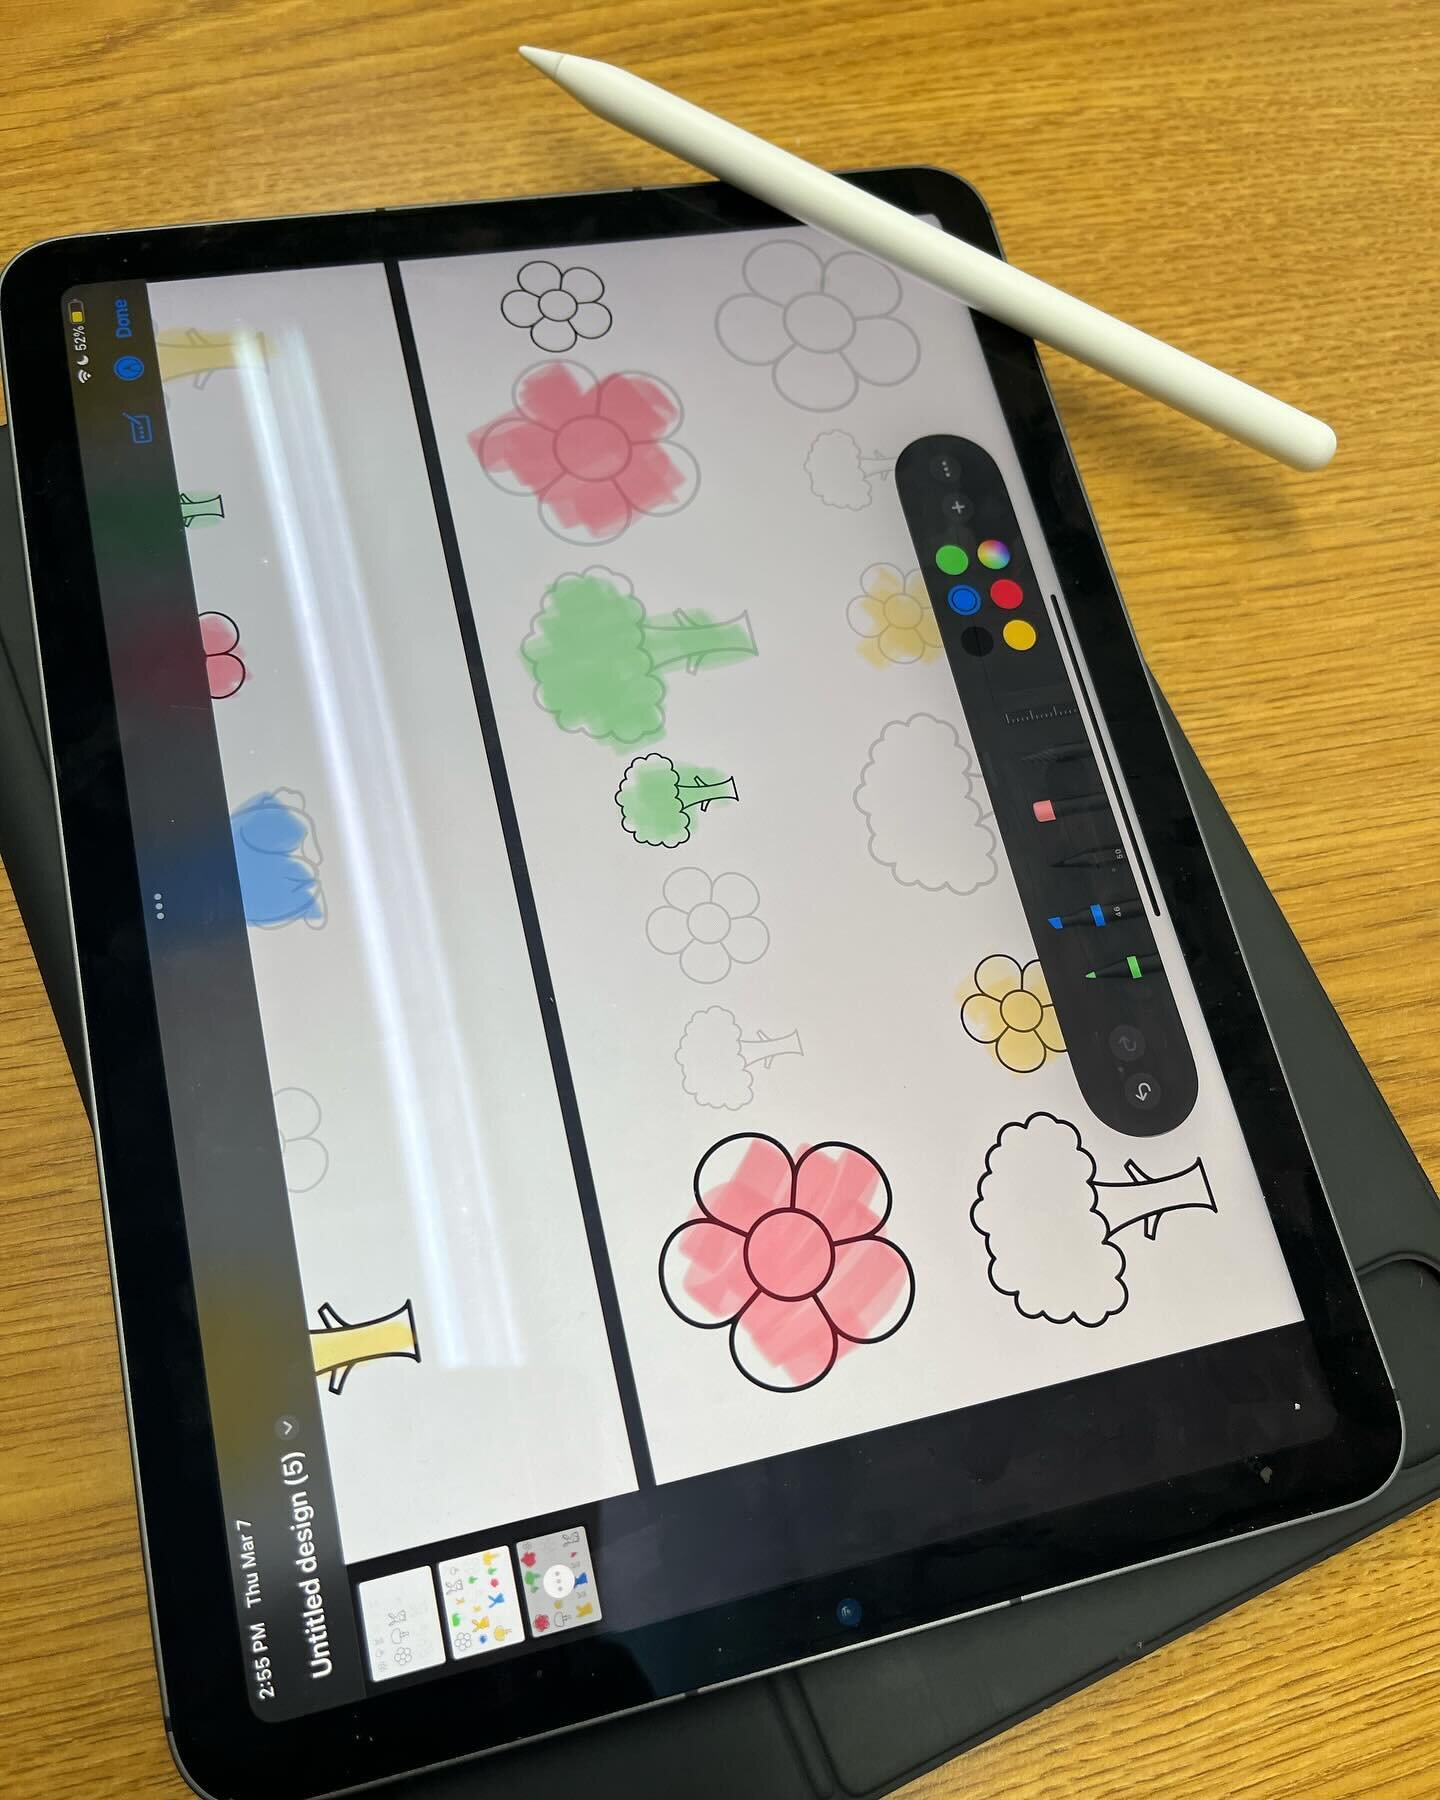 As an SLP who travels to multiple schools, homes, and offices, the iPad and Apple Pencil can really come in handy. Today we were practicing sequential and size concepts by coloring! I love dot markers and tangible activities, but in a pinch this can 